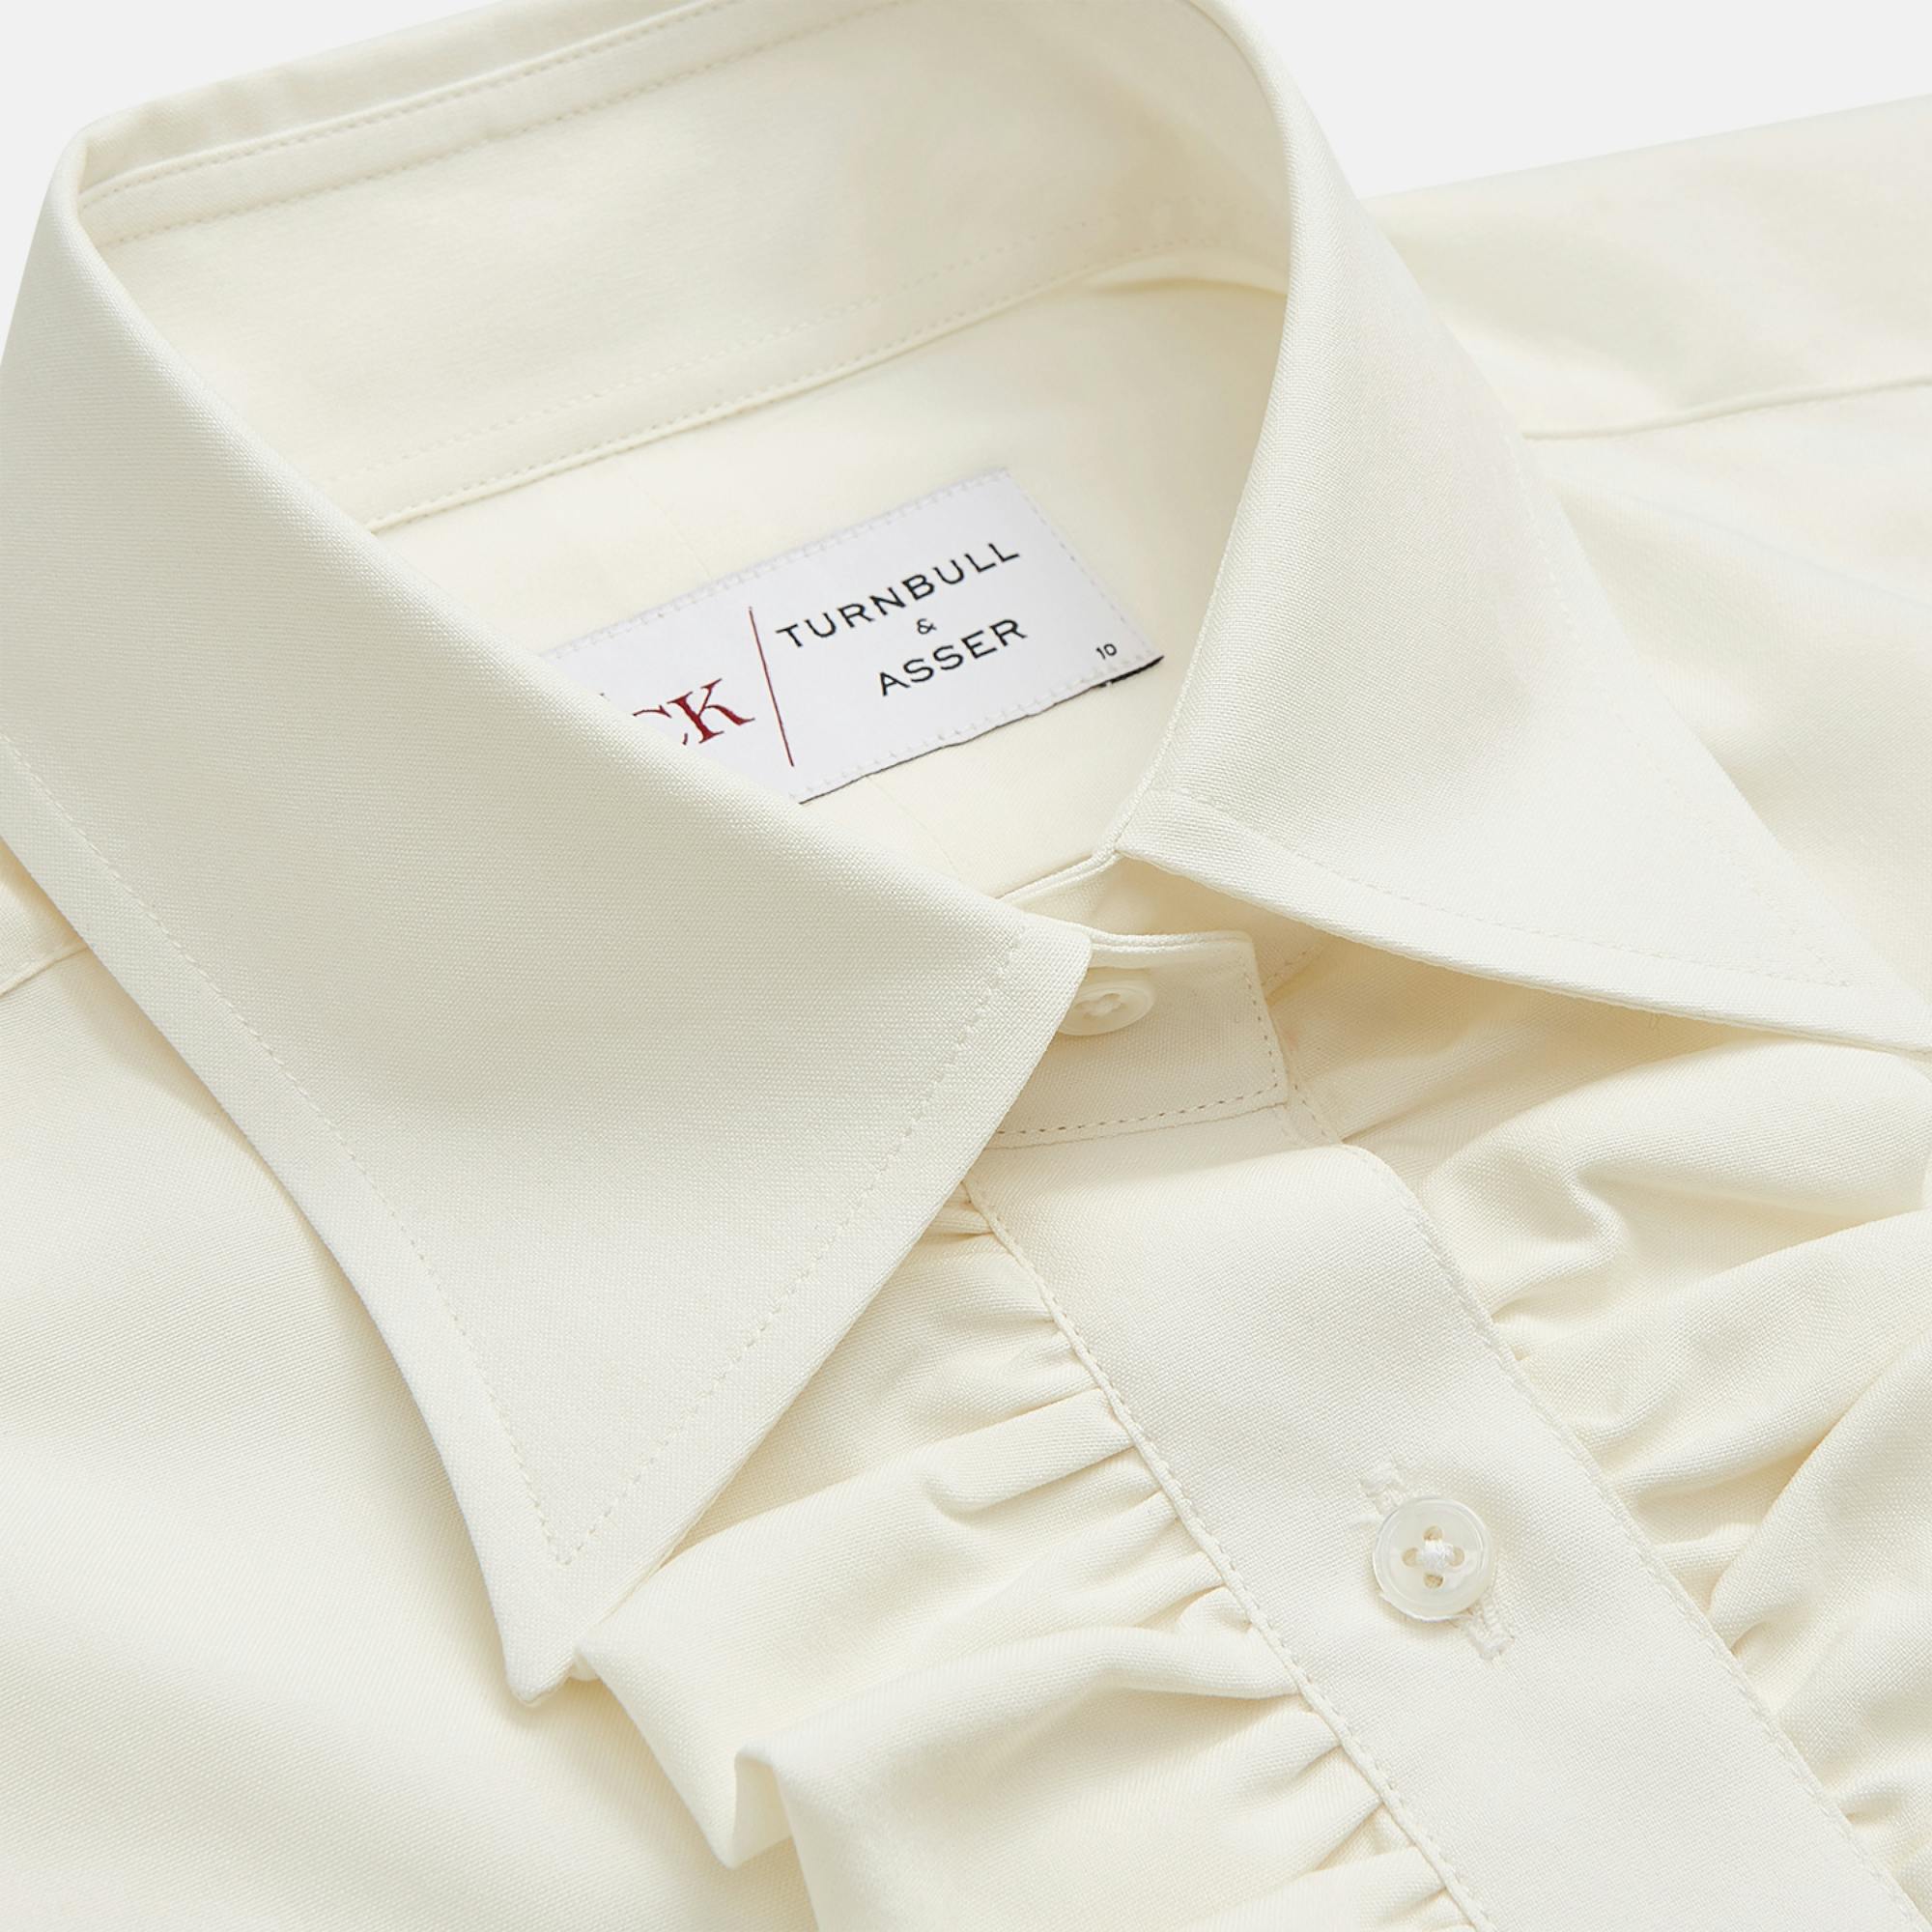 Brands of Tomorrow The Deck and Turnbull & Asser launch four limited edition shirts 